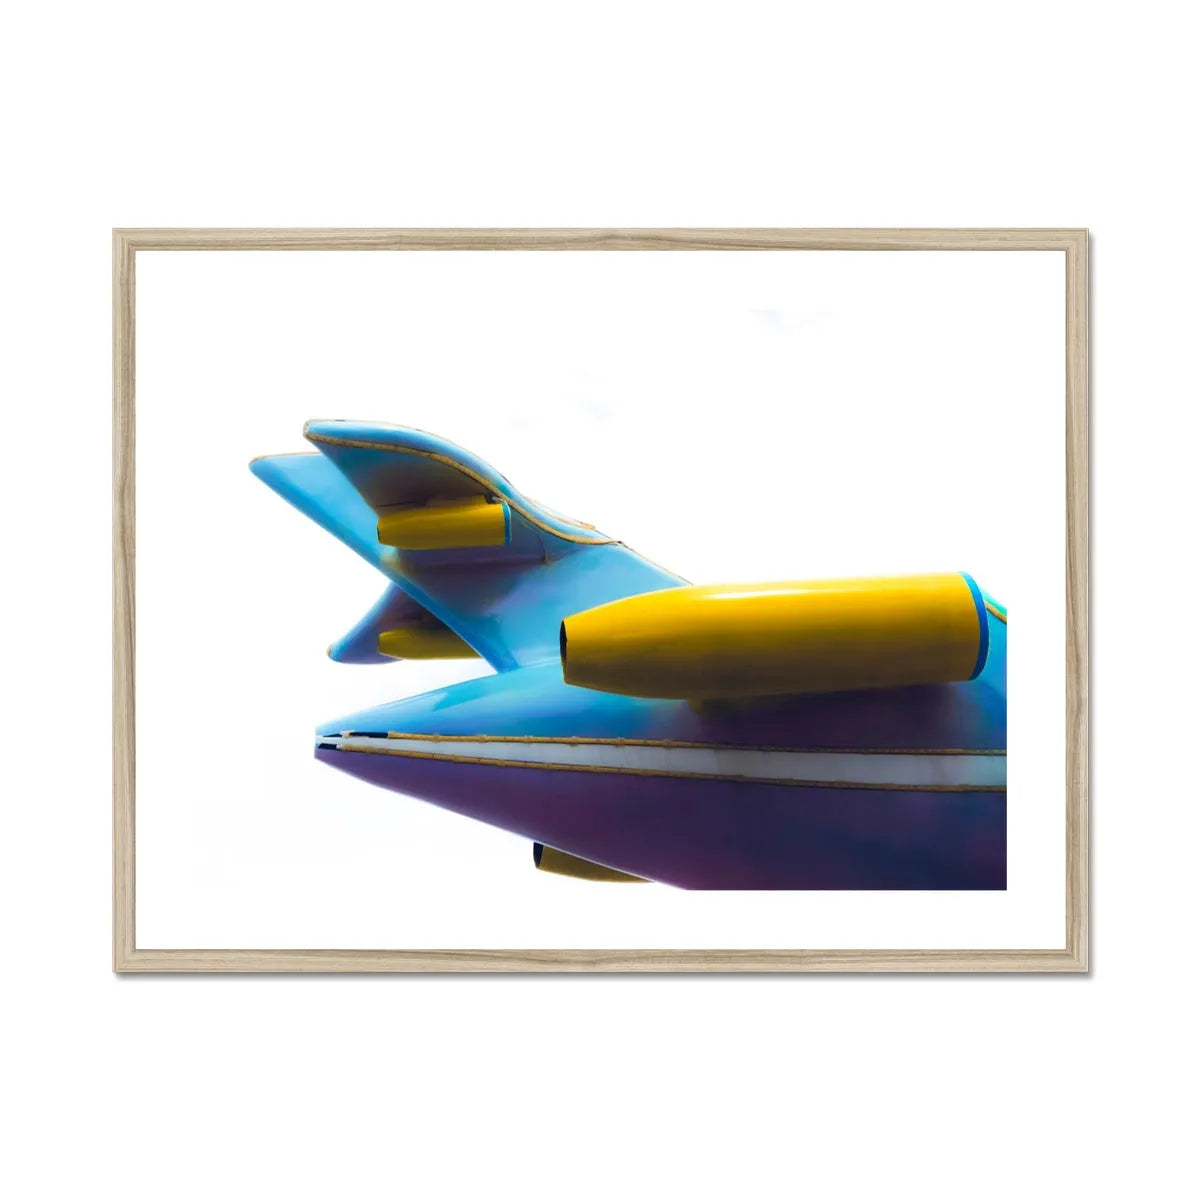 Flying High 4 Framed & Mounted Print - 32’x24’ / Natural Frame - Posters Prints & Visual Artwork - Aesthetic Art